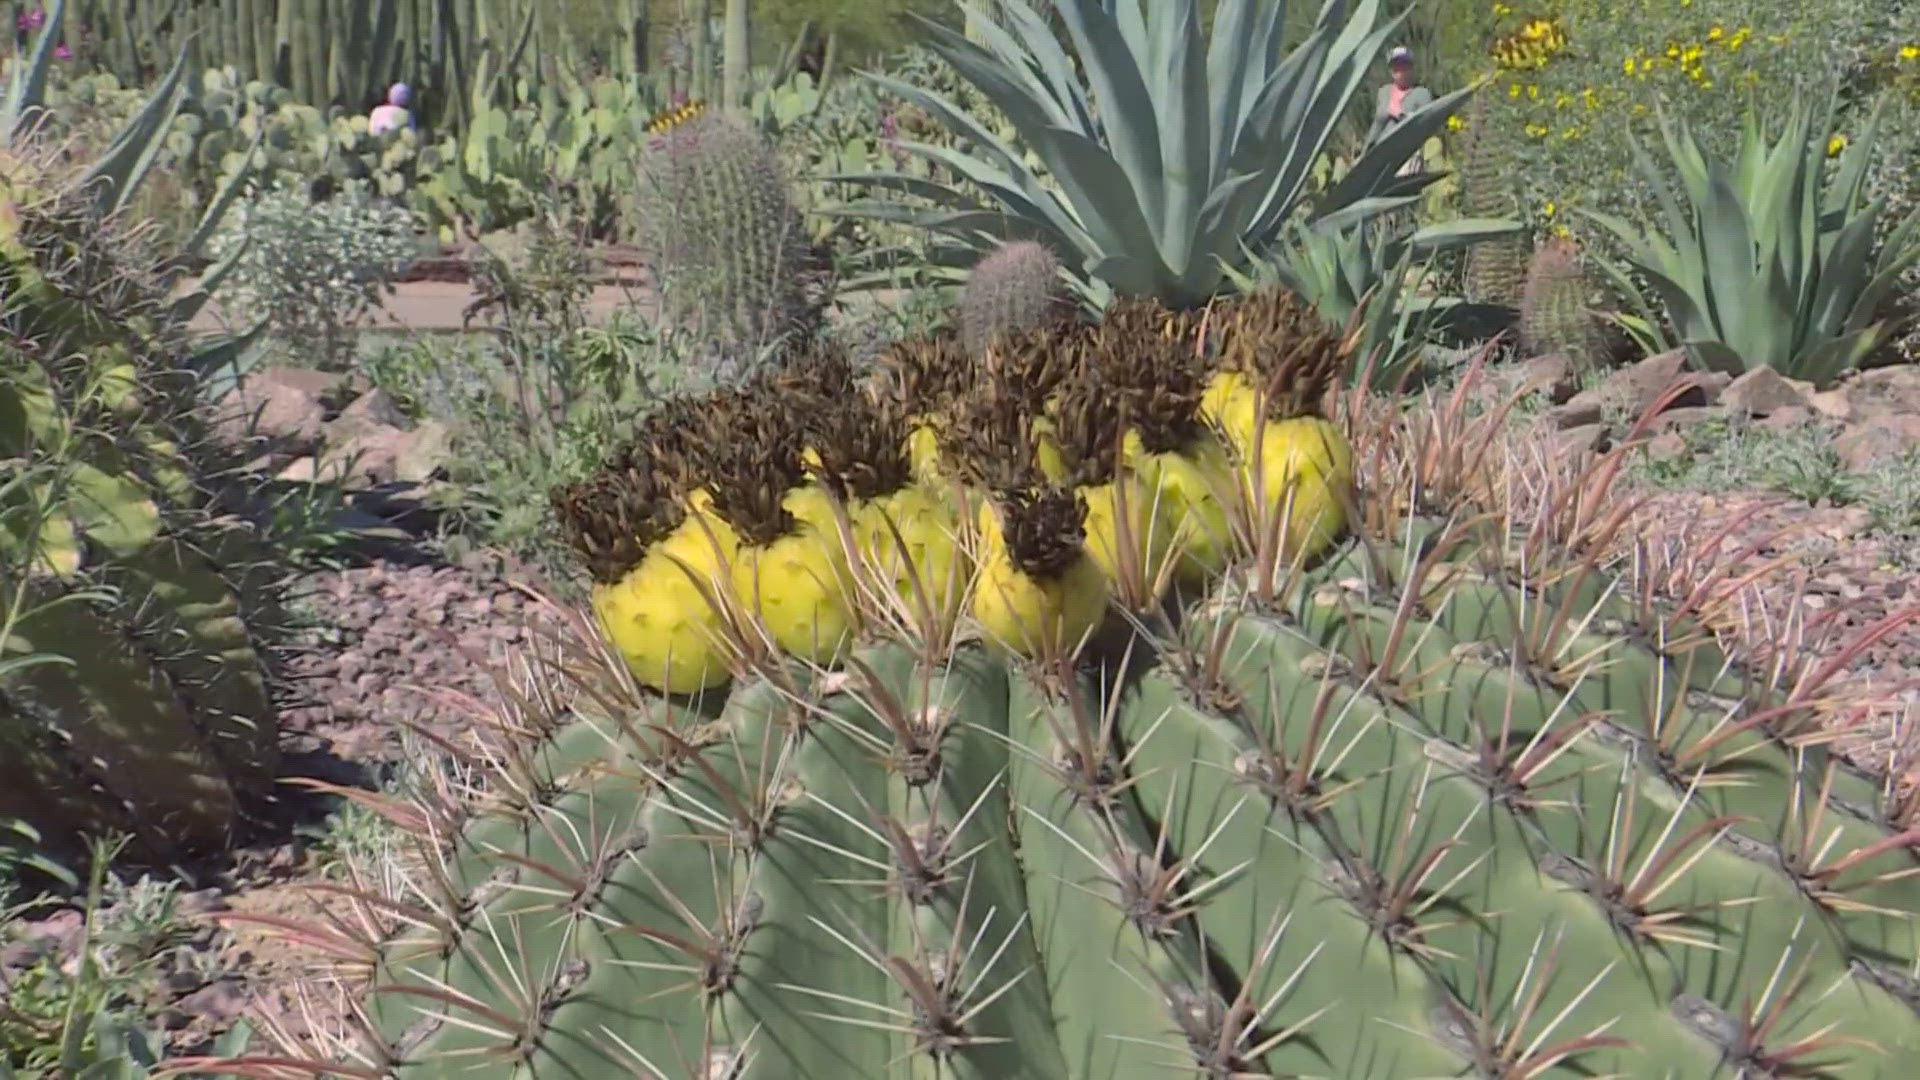 Tiffany Yand, of the City of Chandler Water Conservation Team, explains that many desert plants experience heat stress more now than ever before.